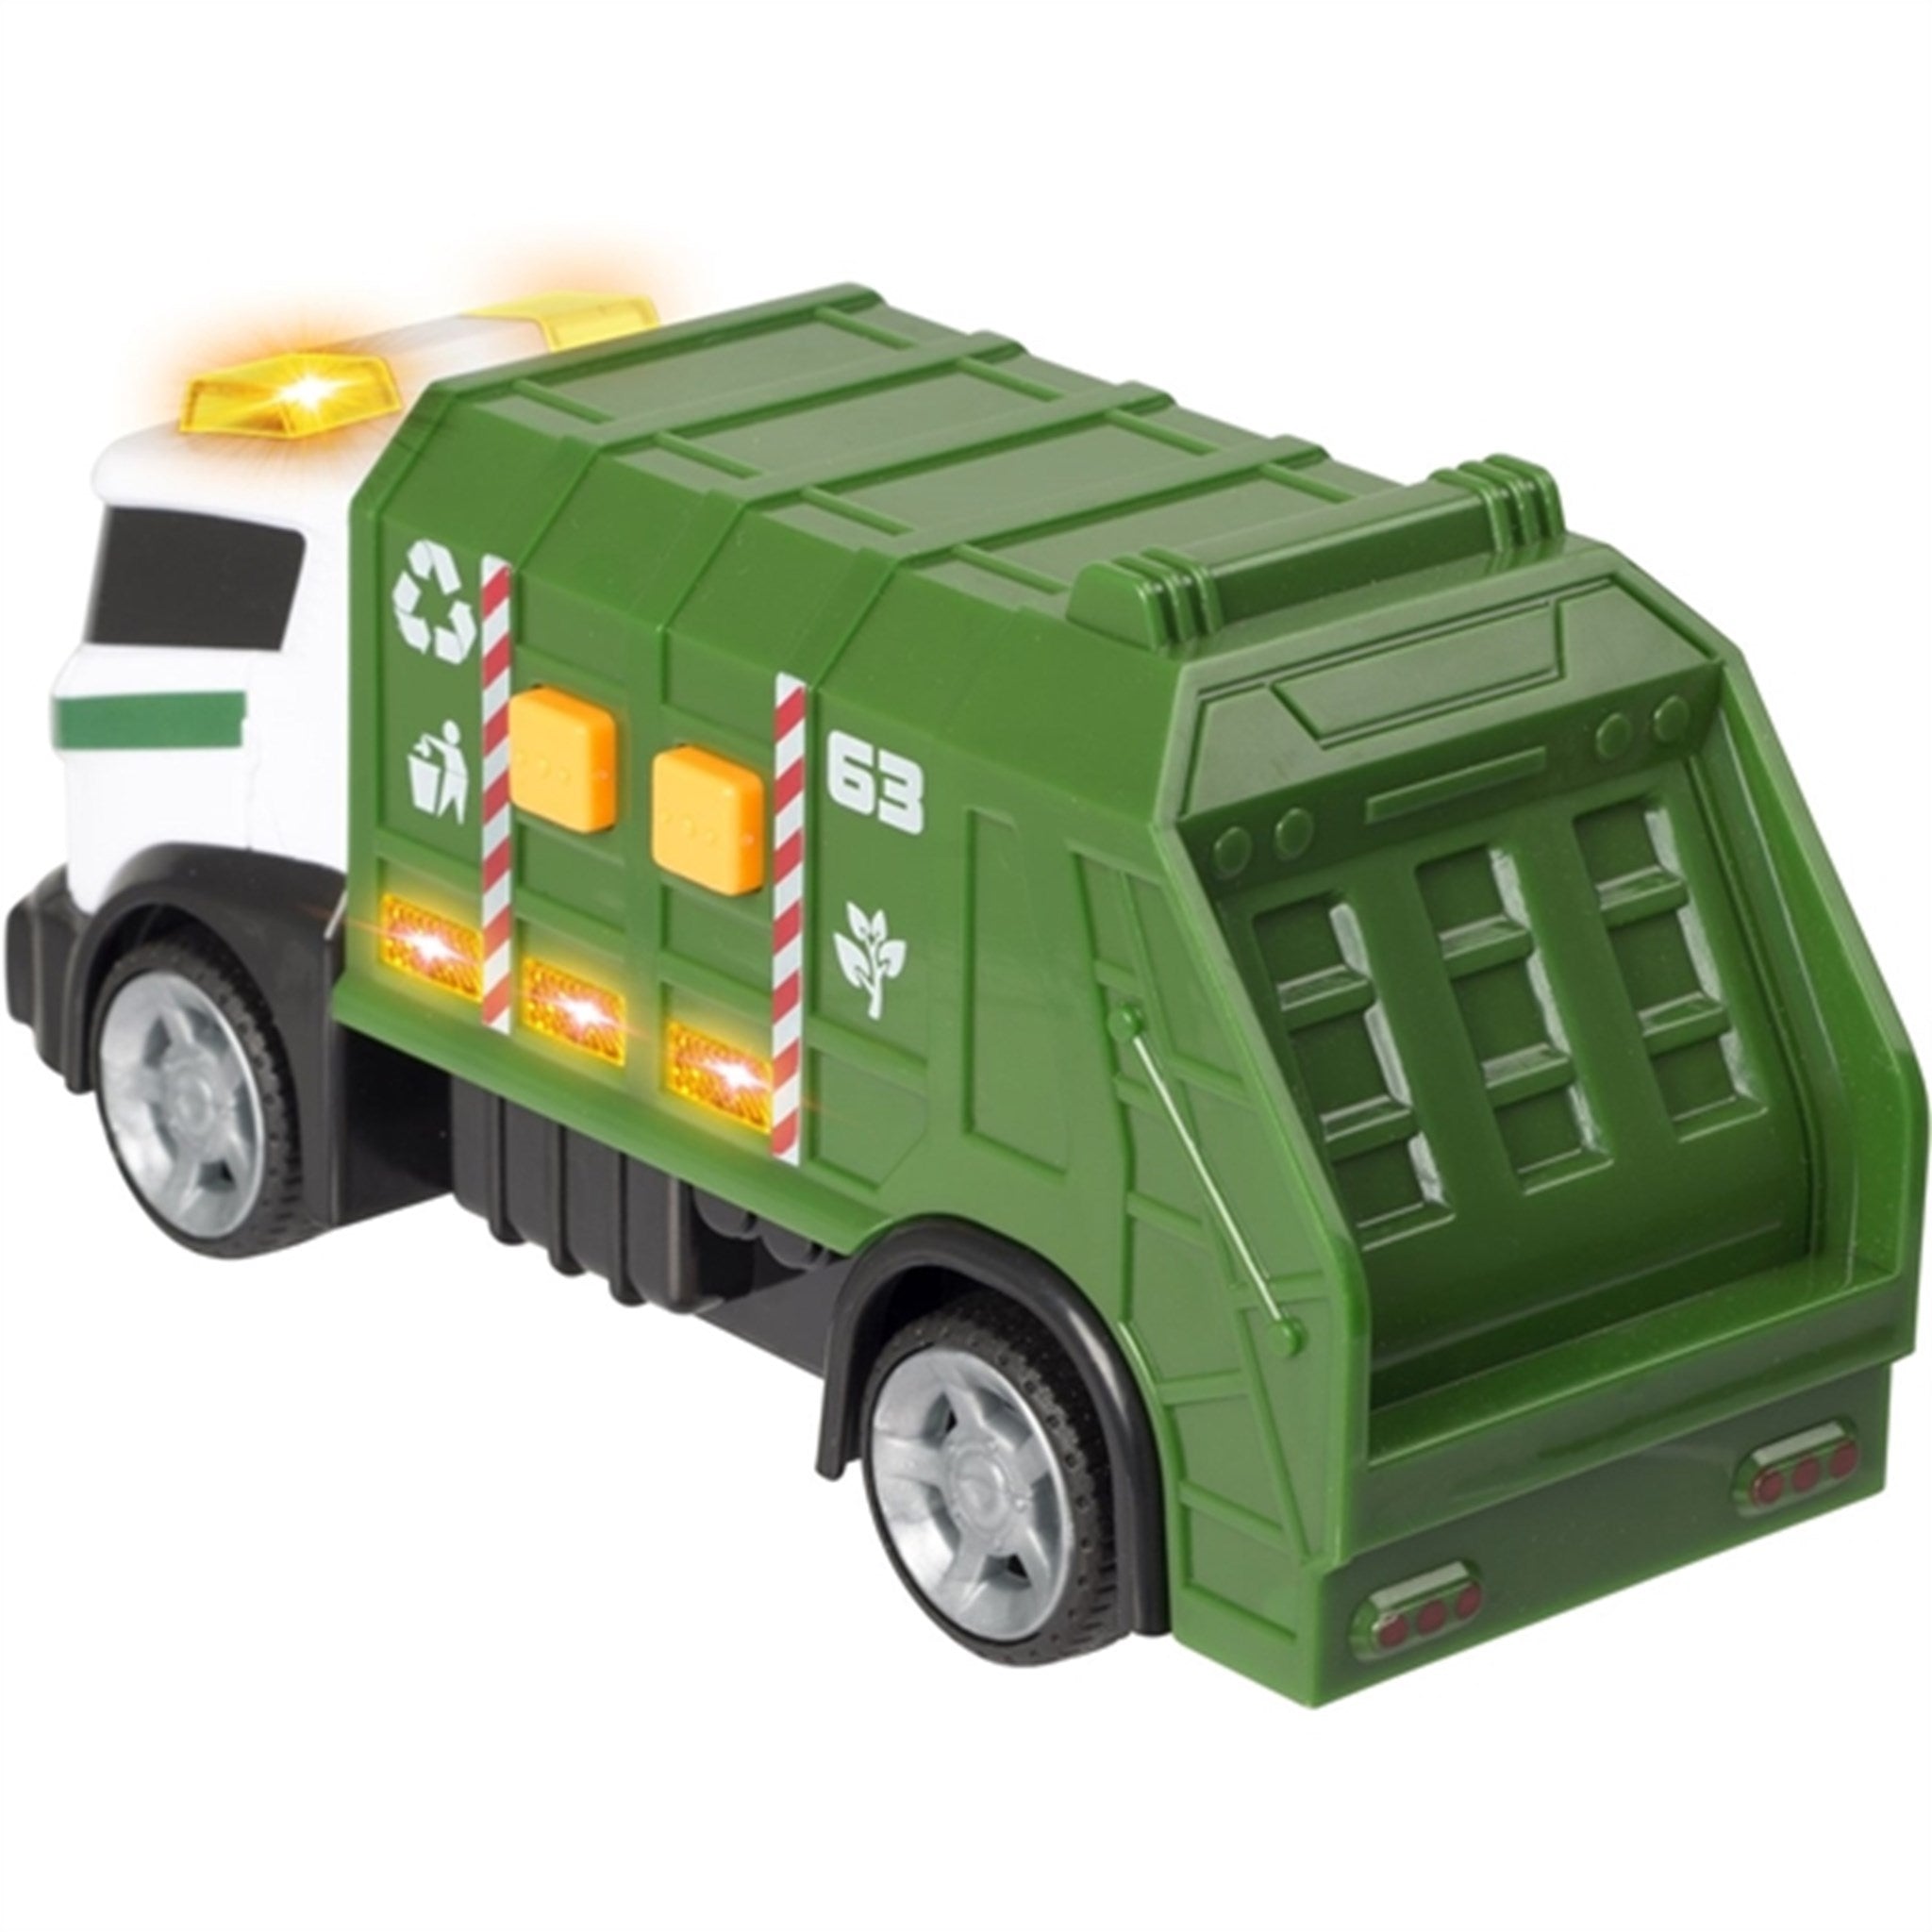 Teamsterz Small L&S Garbage Truck 5